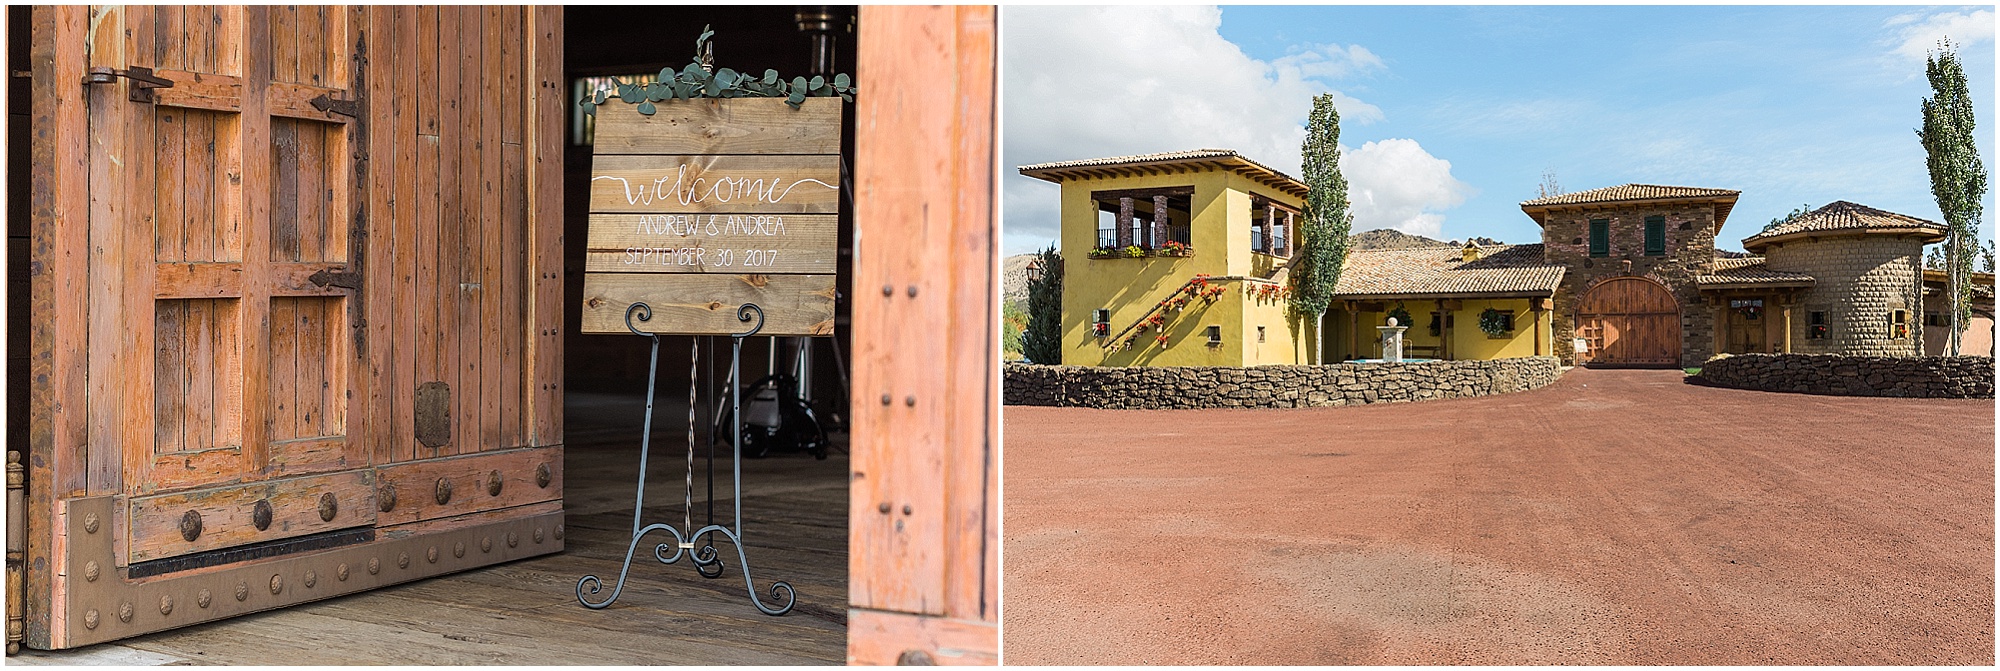 Ranch at the Canyons is a gorgeous Tuscan inspired wedding venue in the High Desert of Central Oregon near Bend. | Erica Swantek Photography